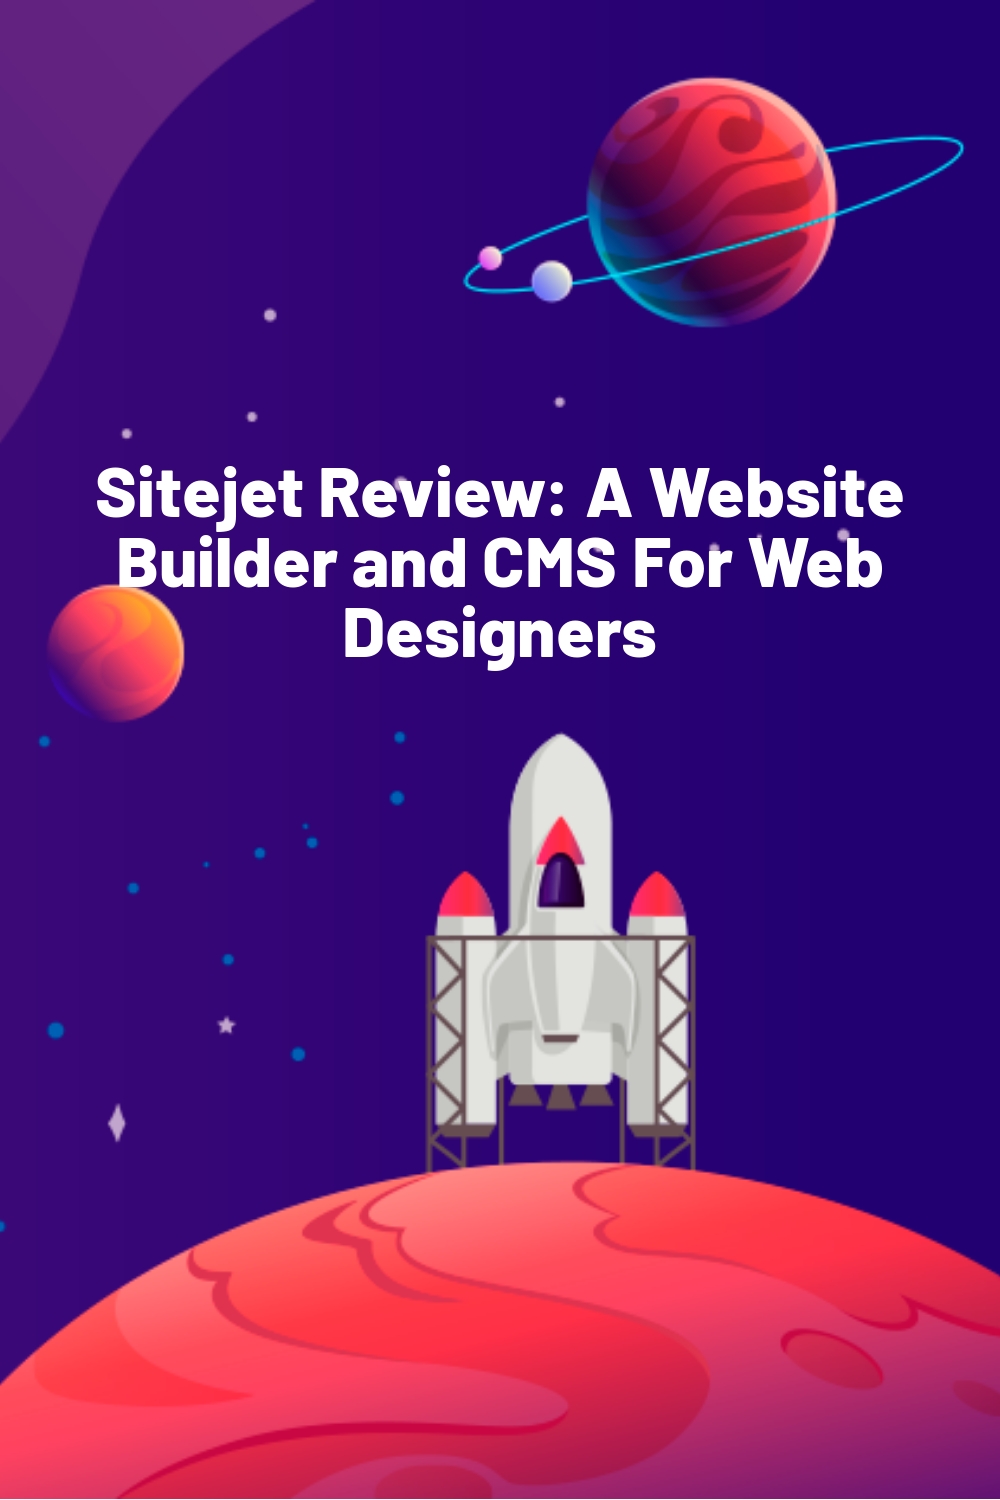 Sitejet Review: A Website Builder and CMS For Web Designers